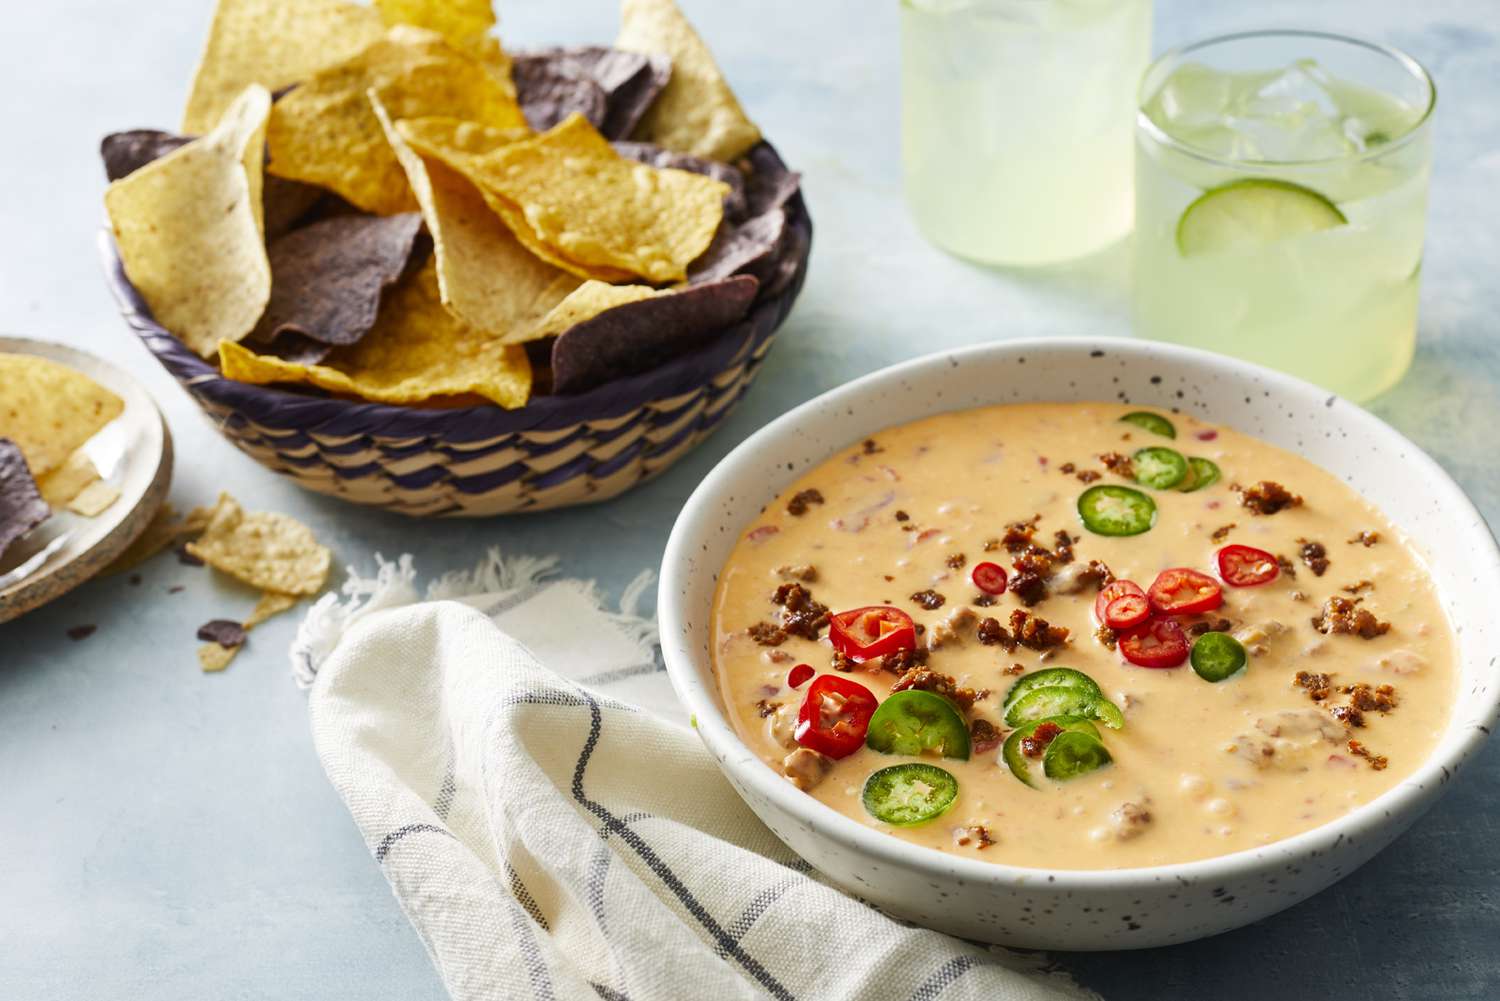 Chorizo queso dip topped with fresh chilies and served with a basket of chips and a few margaritas